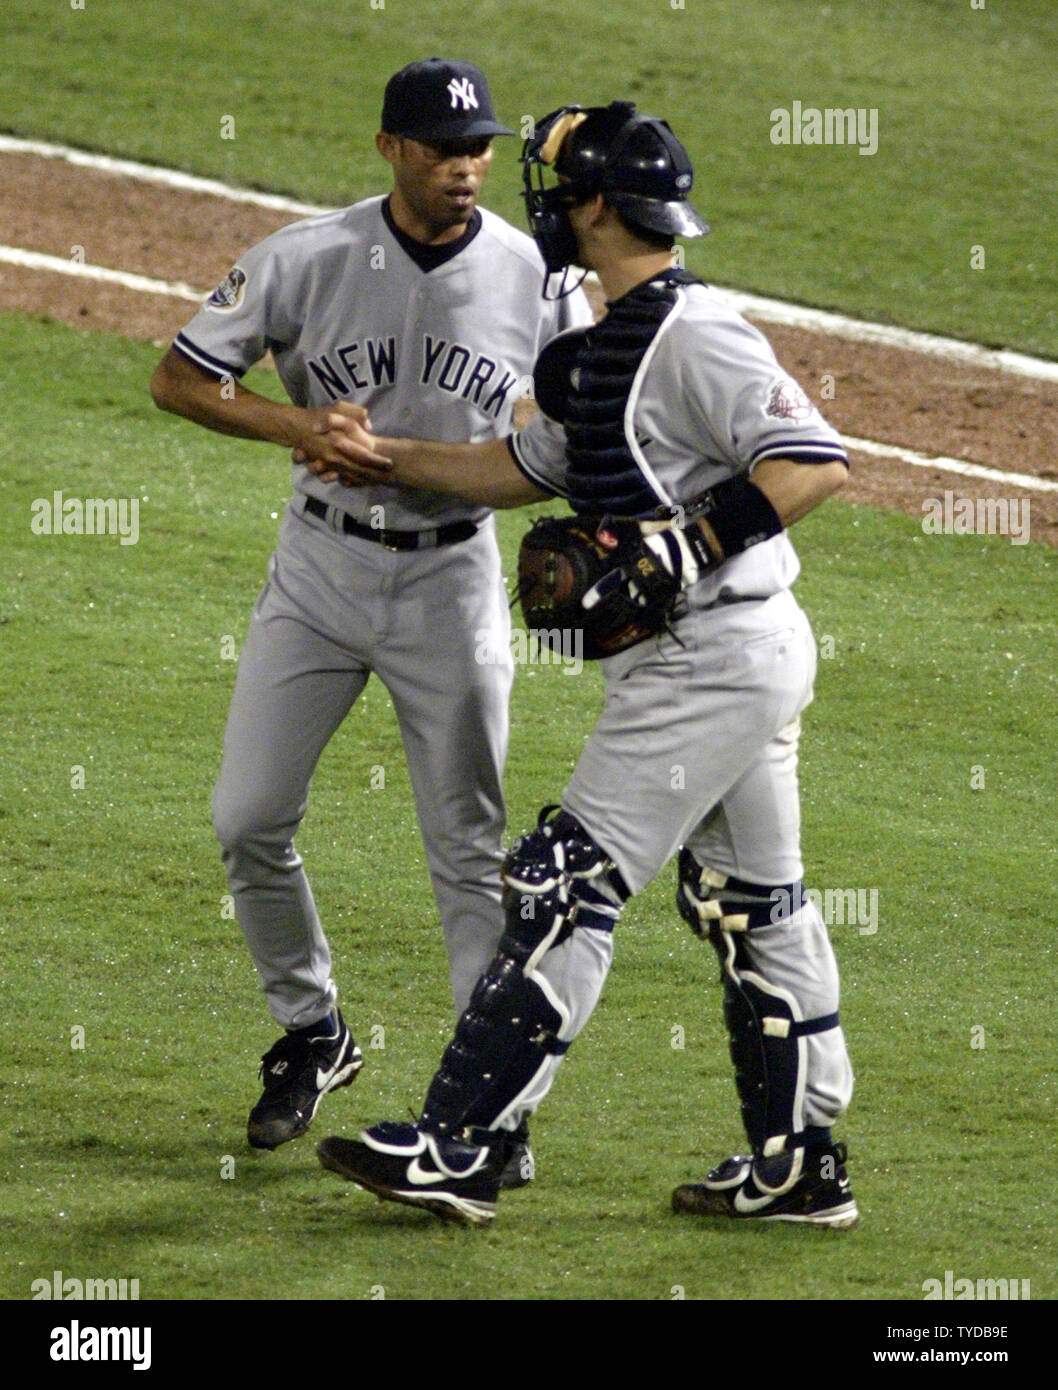 New York Yankees catcher Jorge Posada celebrates with Mariano Rivera after  they beat the Florida Marlins 6-1 in game 3 of the 2003 MLB World Series,  at Pro Player Stadium, Miami, Florida